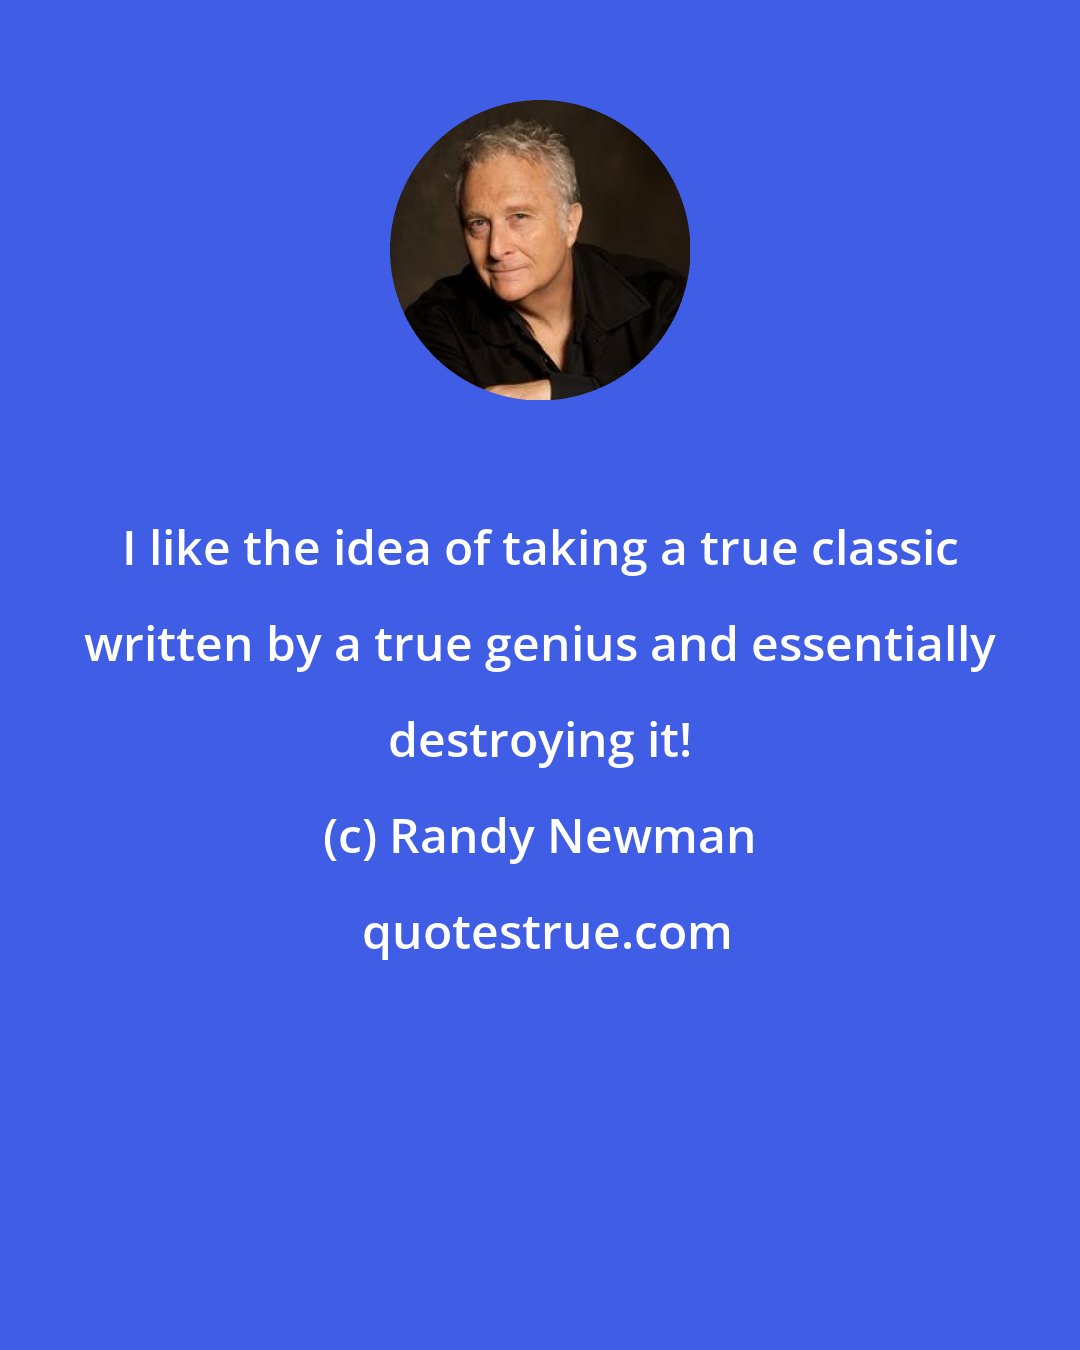 Randy Newman: I like the idea of taking a true classic written by a true genius and essentially destroying it!